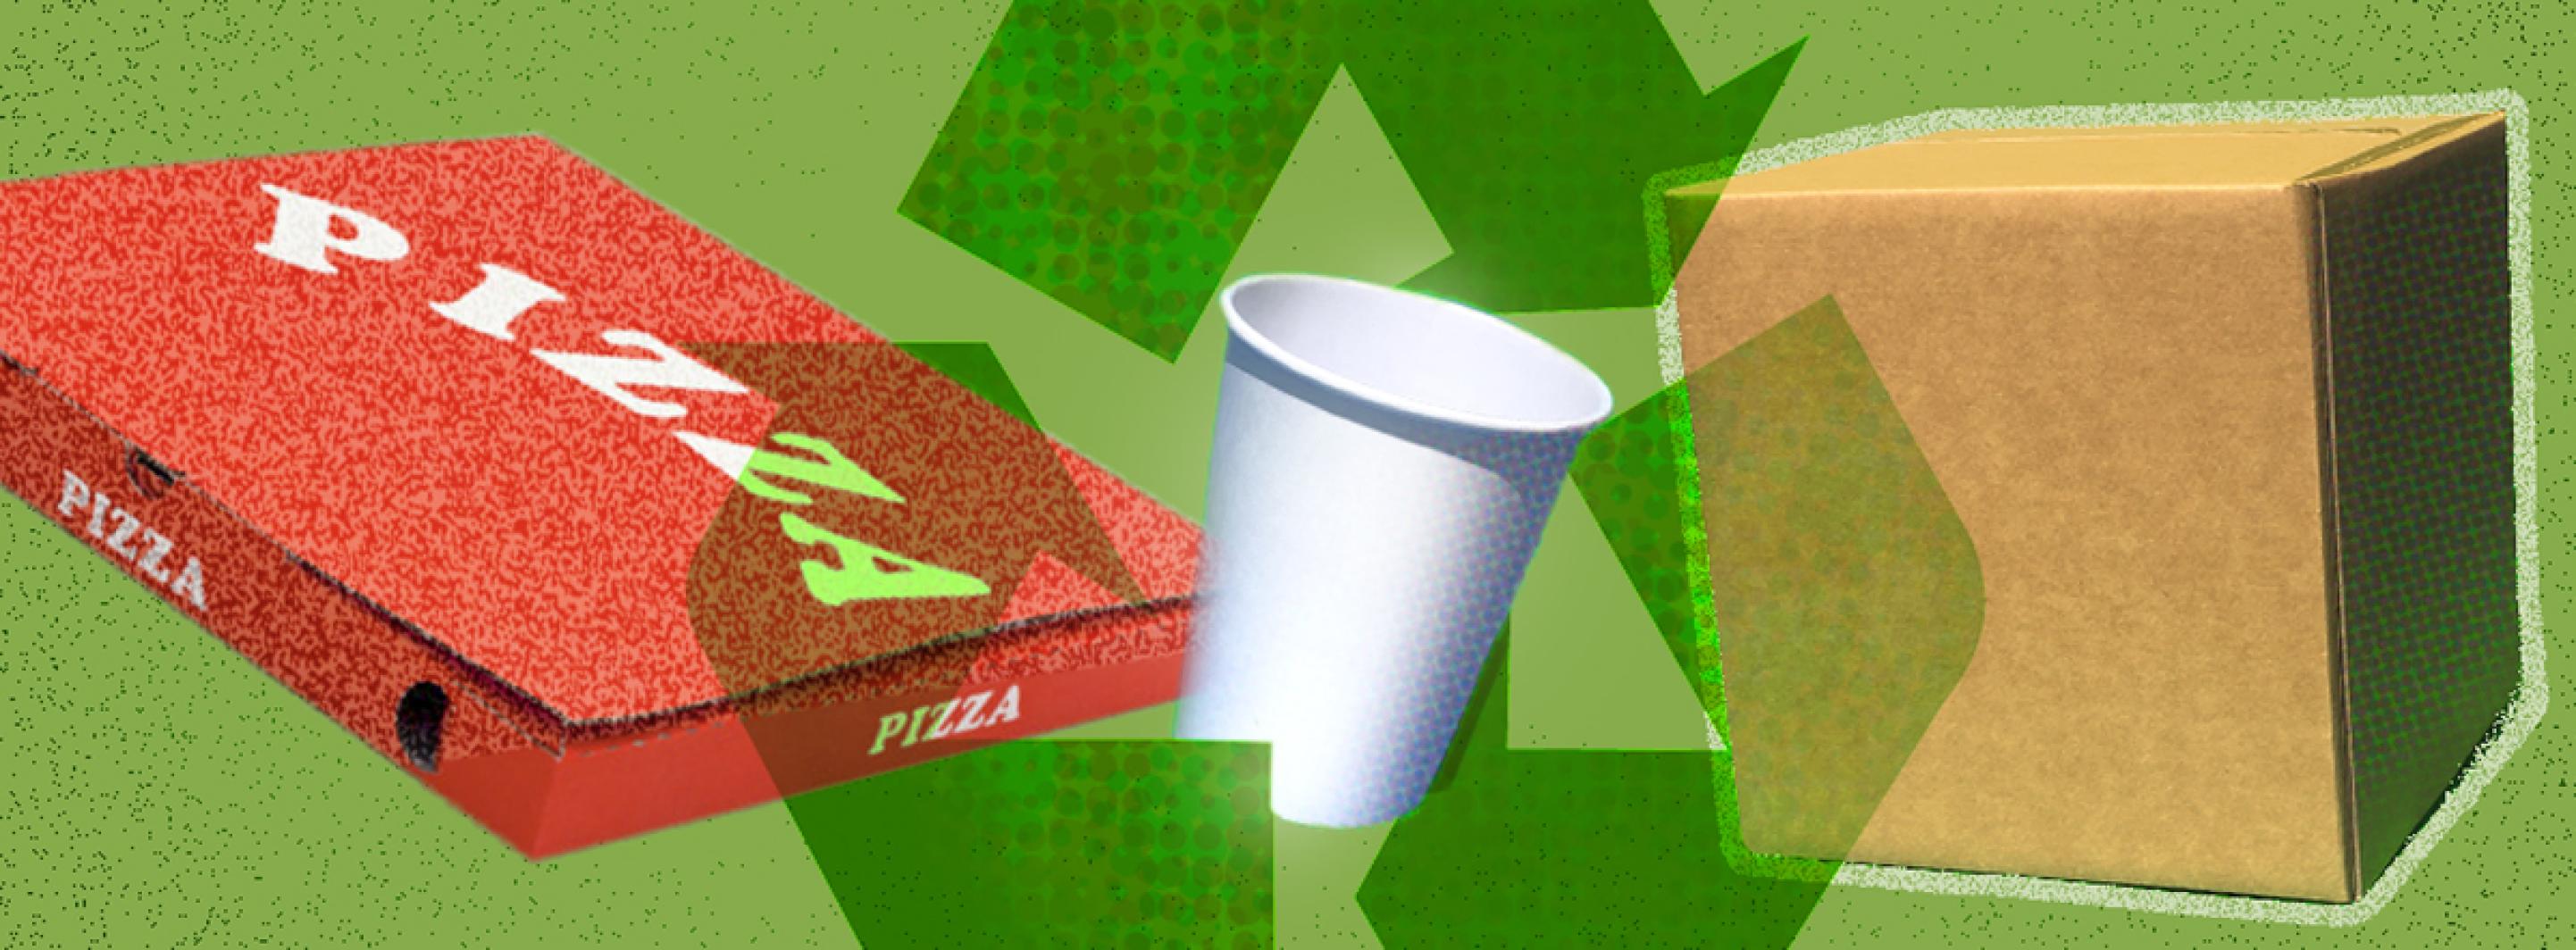 Paper products that can be recycled